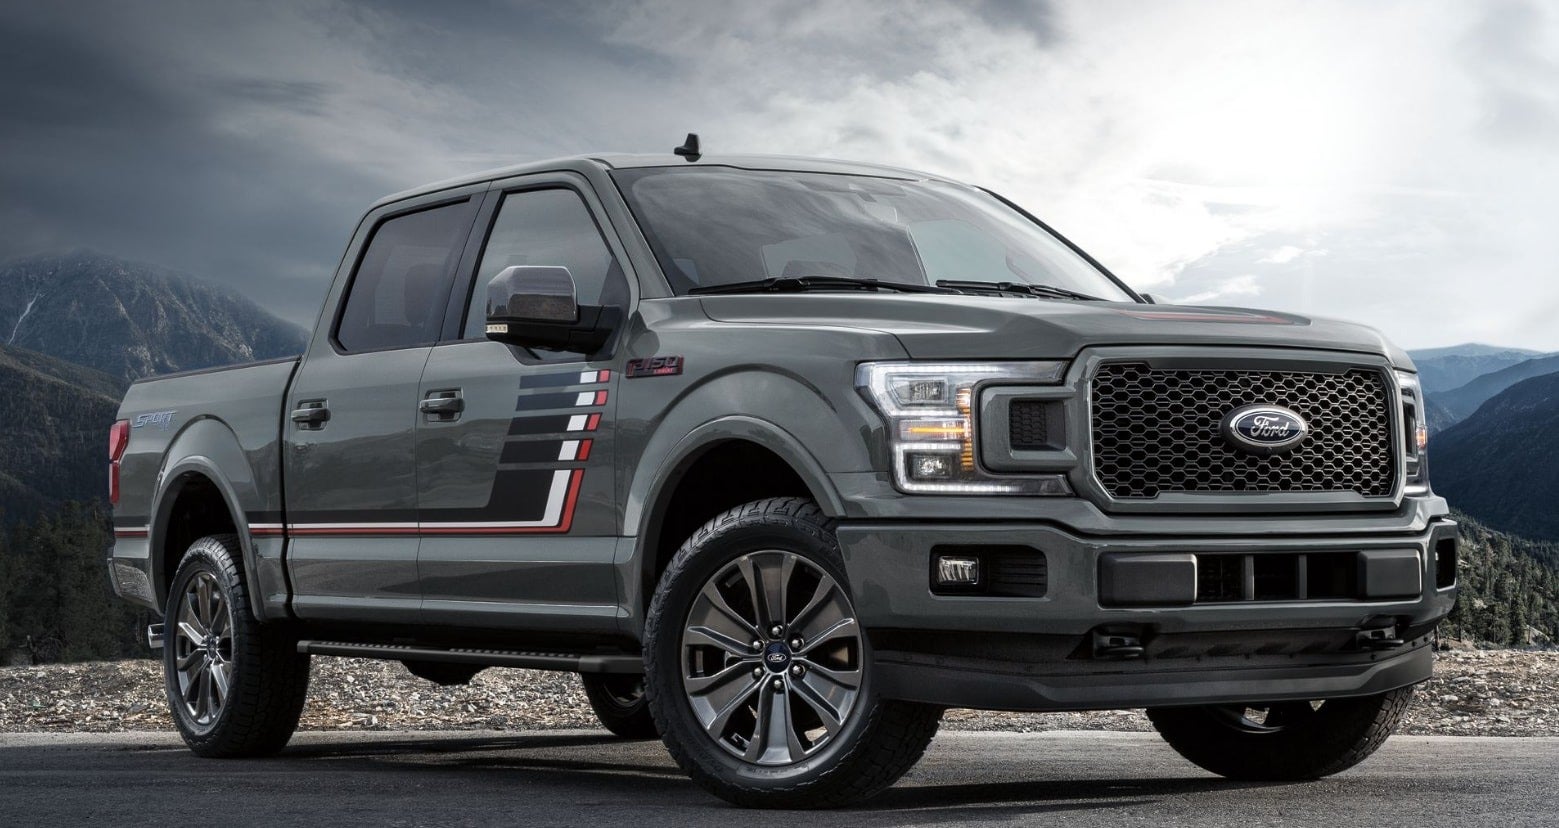 image of a Ford F-150